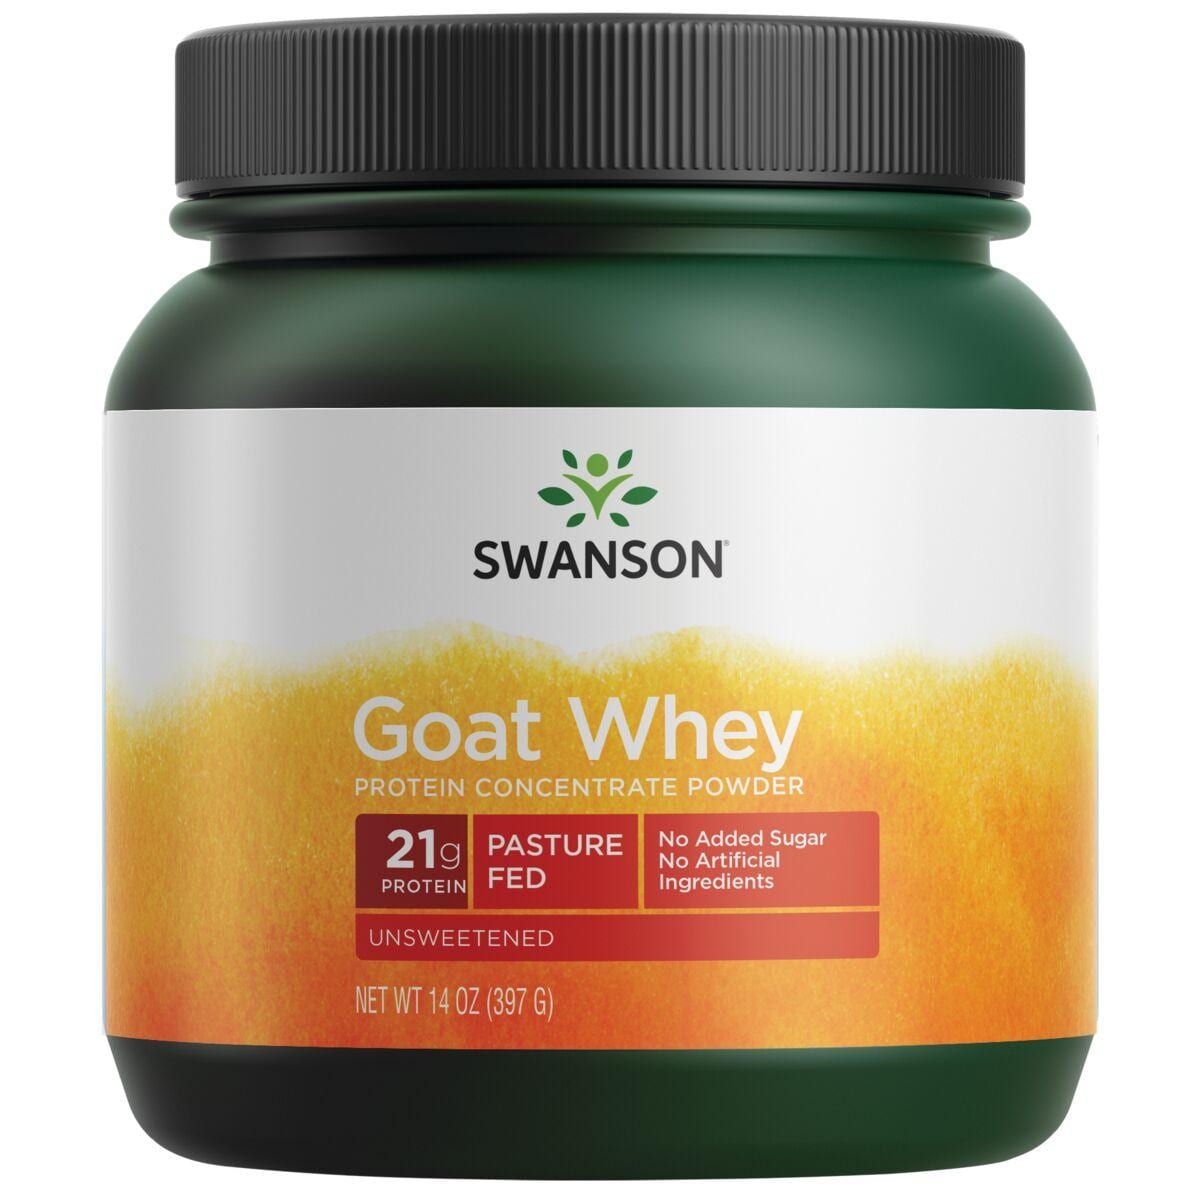 Swanson Ultra Goat Whey Protein Concentrate Powder - Pasture Fed | 14 oz Powder